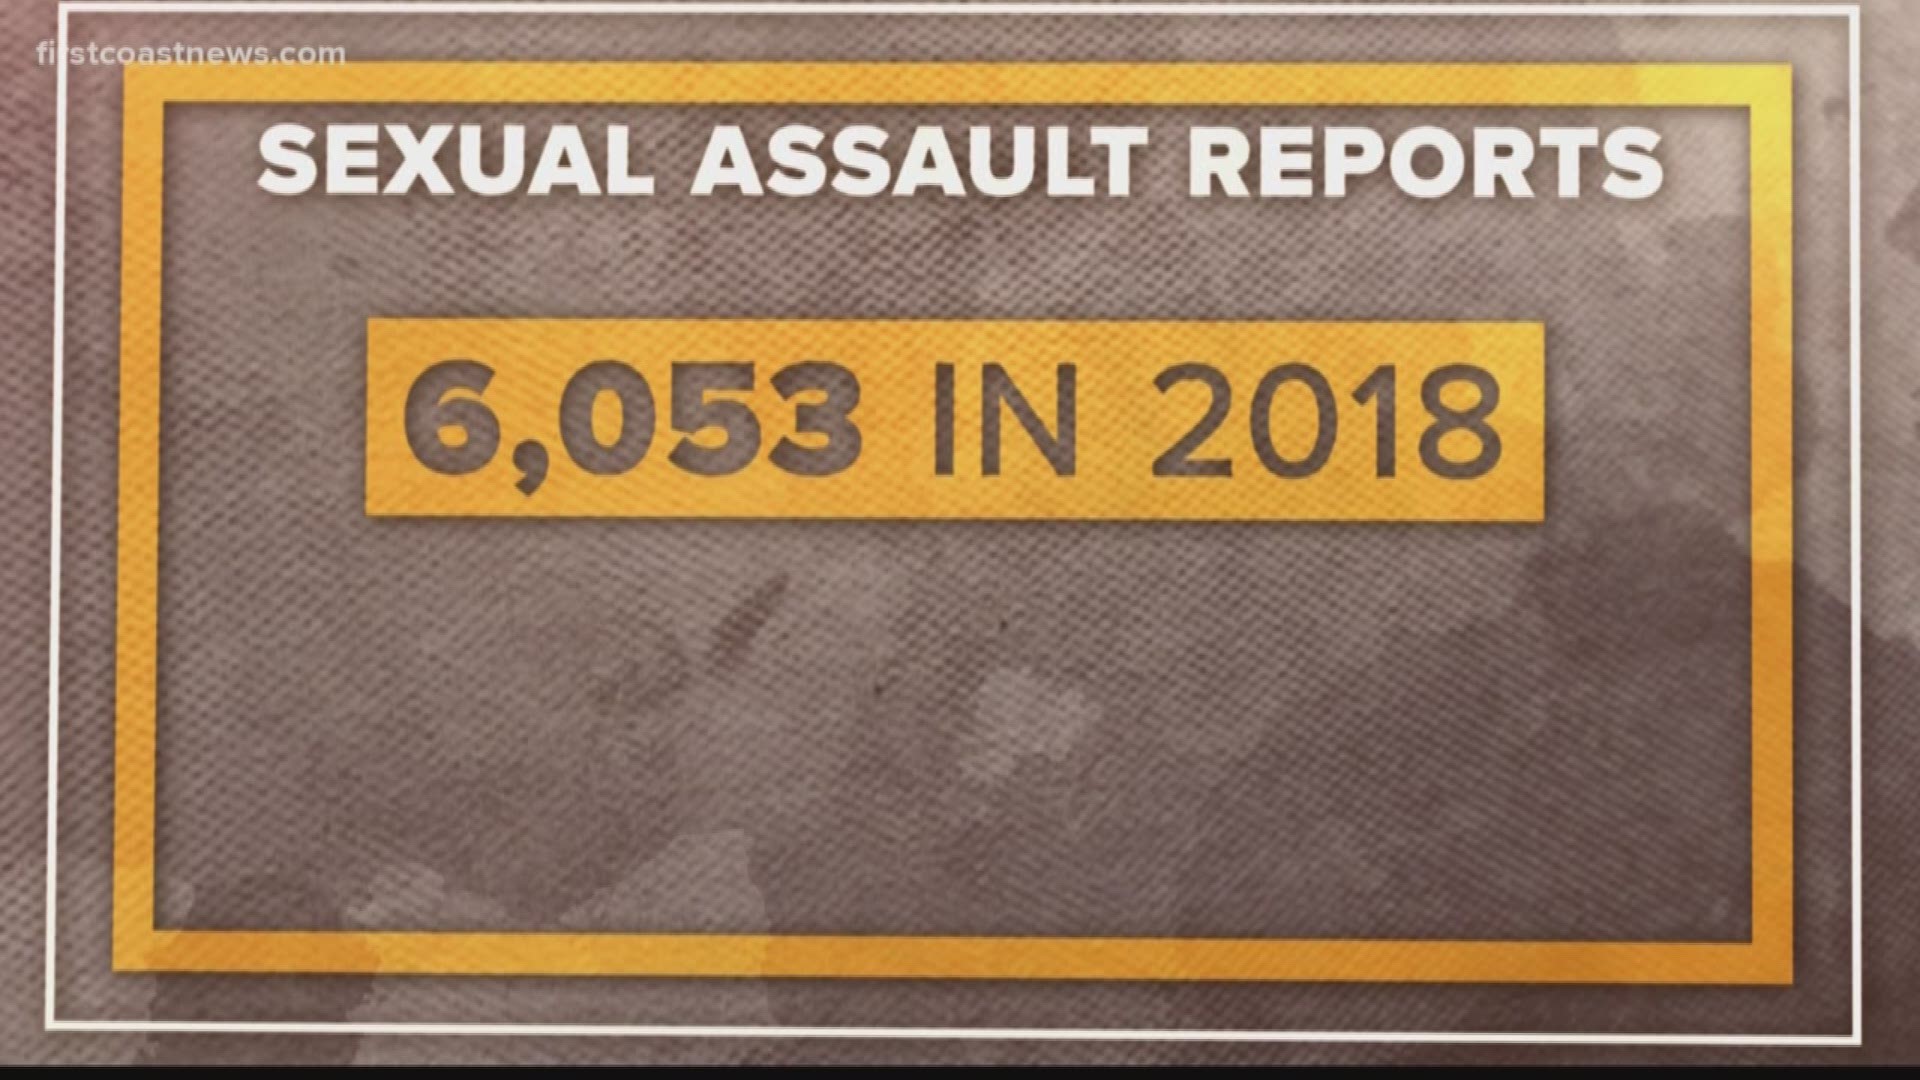 A new report reveals 20,500 service members were sexually assaulted in 2018. An anonymous survey, conducted by the Department of Defense, determined 13,000 women and 7,500 men were victims of unwanted sexual contact.